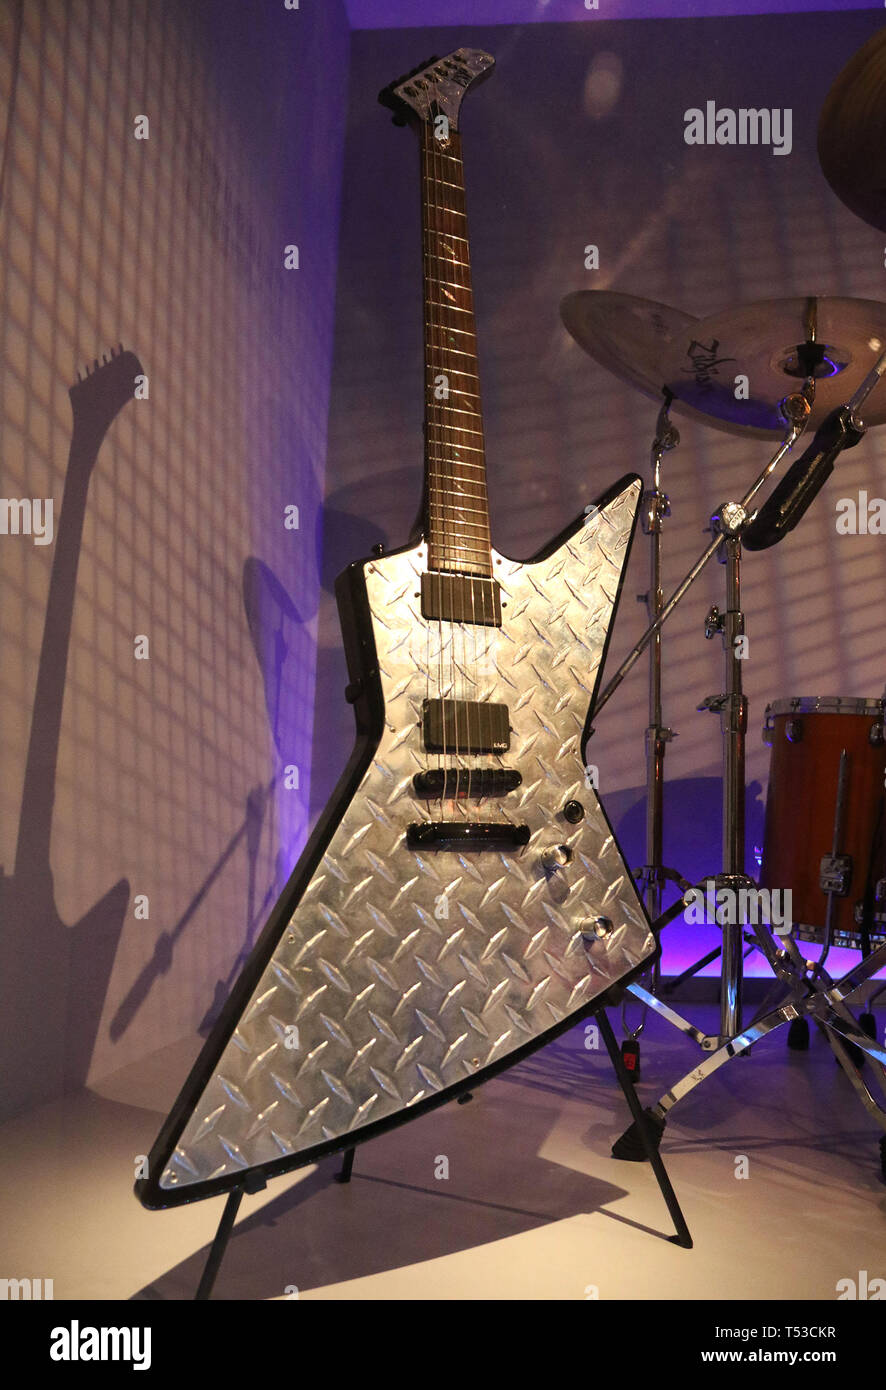 April 20, 2019 - New York City, New York, U.S. - JH-2 ESP CUSTOM SHOP Electric Guitar used by JAMES HETFIELD from METALLICA on display at the 'Play It Loud: Instruments of Rock and Roll' exhibit held at the Metropolitan Museum of Art. (Credit Image: © Nancy Kaszerman/ZUMA Wire) Stock Photo